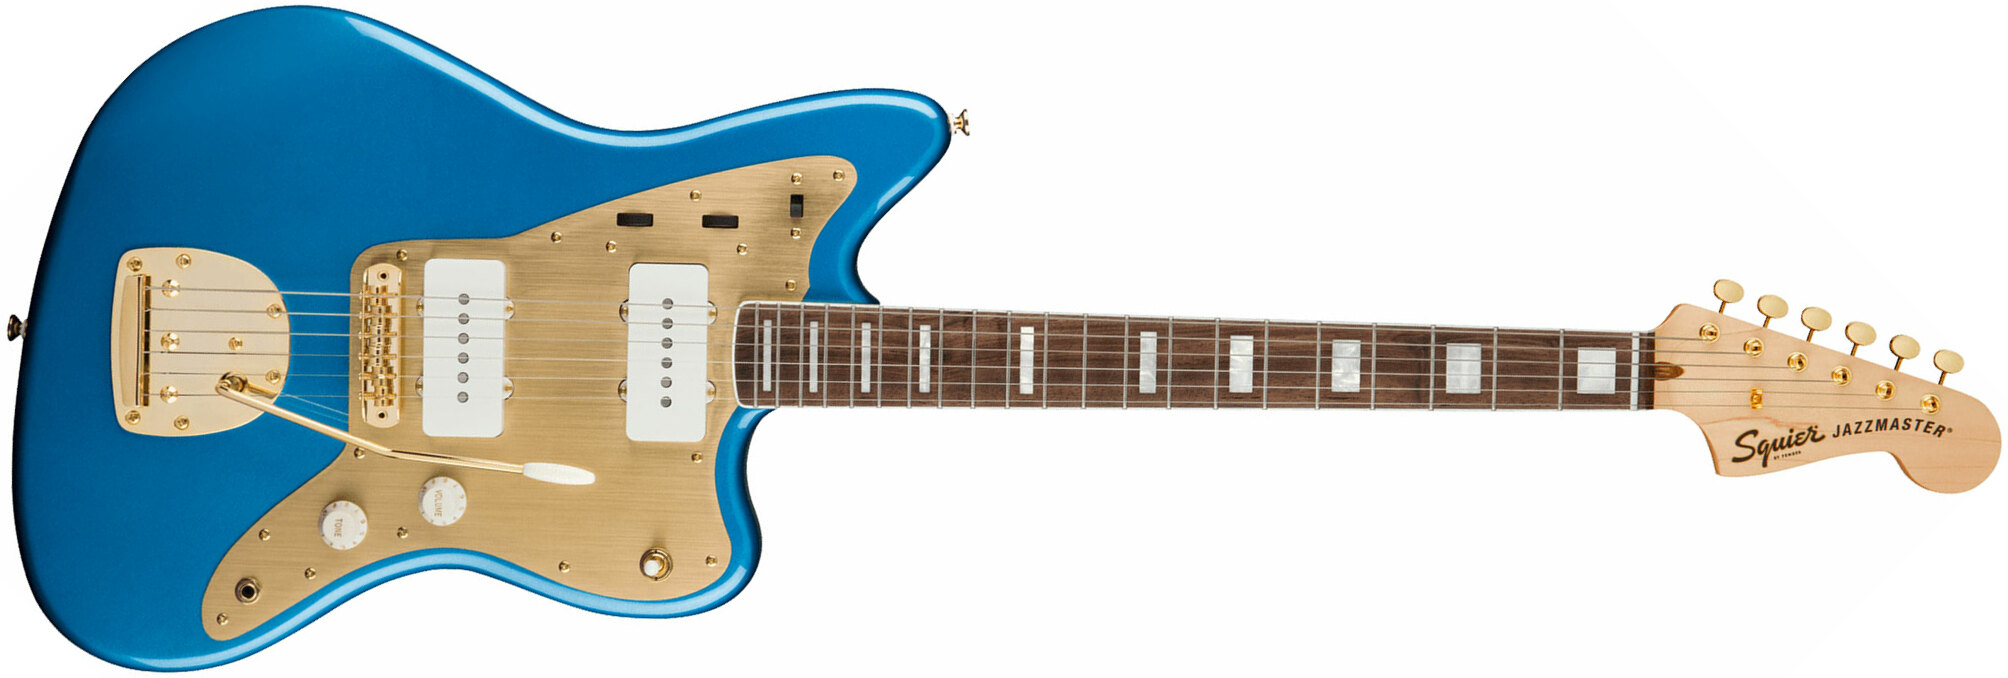 Squier Jazzmaster 40th Anniversary Gold Edition Lau - Lake Placid Blue - Retro rock electric guitar - Main picture